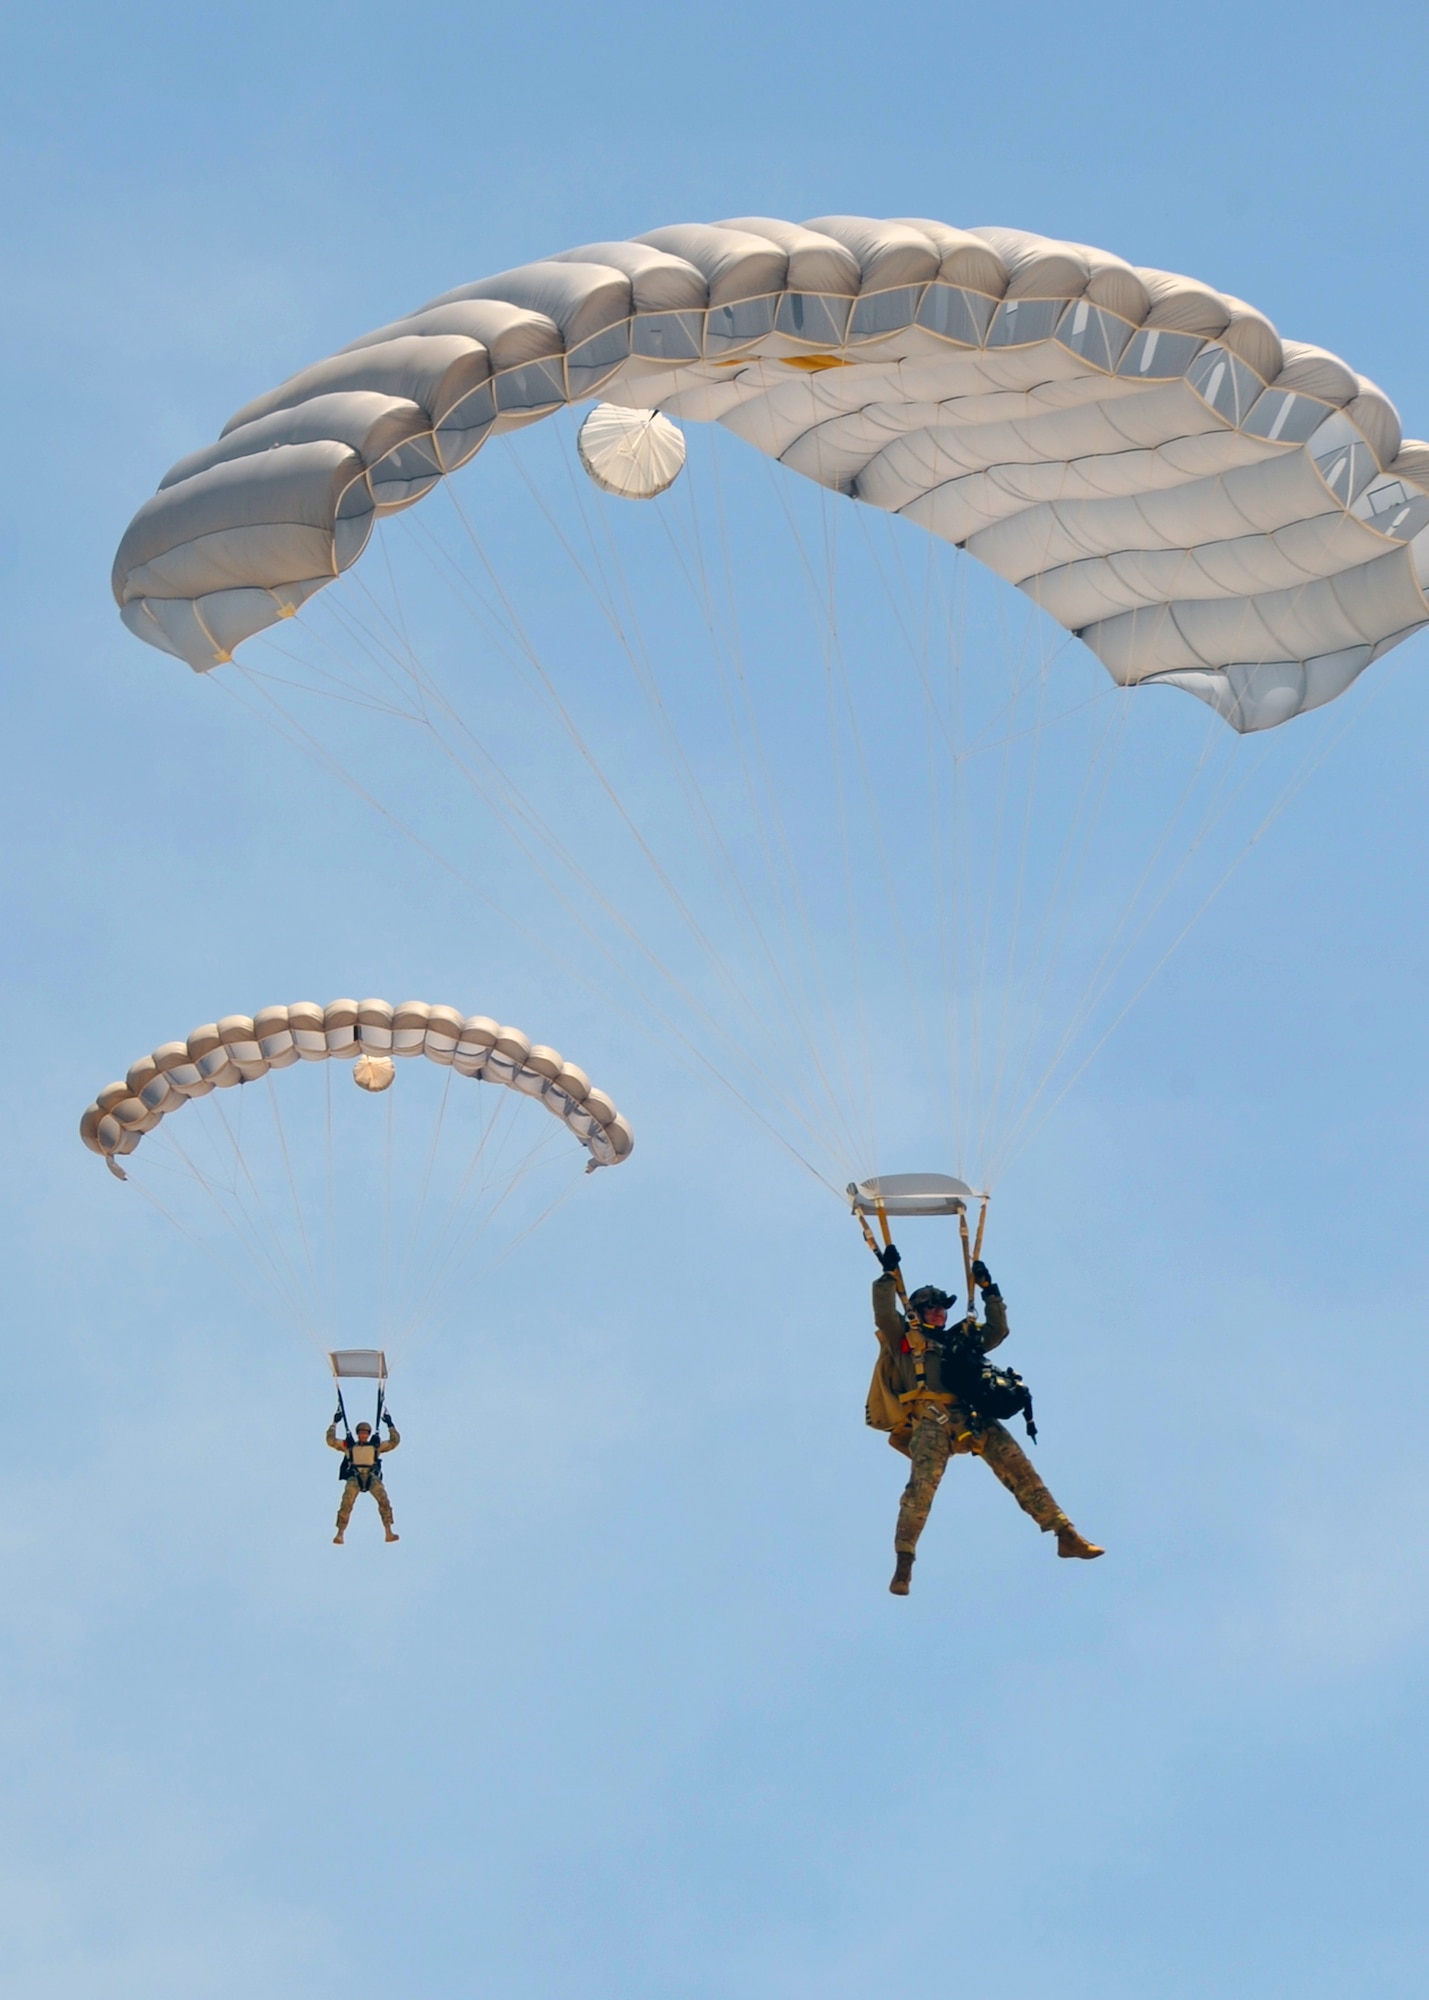 Pararescuemen from the 306th Rescue Squadron at Davis-Monthan Air Force Base, Ariz., descend on Eloy, Ariz., during training jumps May 14. The 306th RQSis an Air Force Reserve Command combat search and rescue unit assigned to the 943rd Rescue Group. Pararescuemen, also known as PJs, are the only Department of Defense elite combat forces specifically organized, trained, equipped and postured to conduct full-spectrum personnel recovery to include both conventional and unconventional combat rescue operations. These battlefield Airmen are the most highly trained and versatile personnel recovery specialists in the world. (U.S. Air Force photo by Tech. Sgt. Carolyn Herrick)